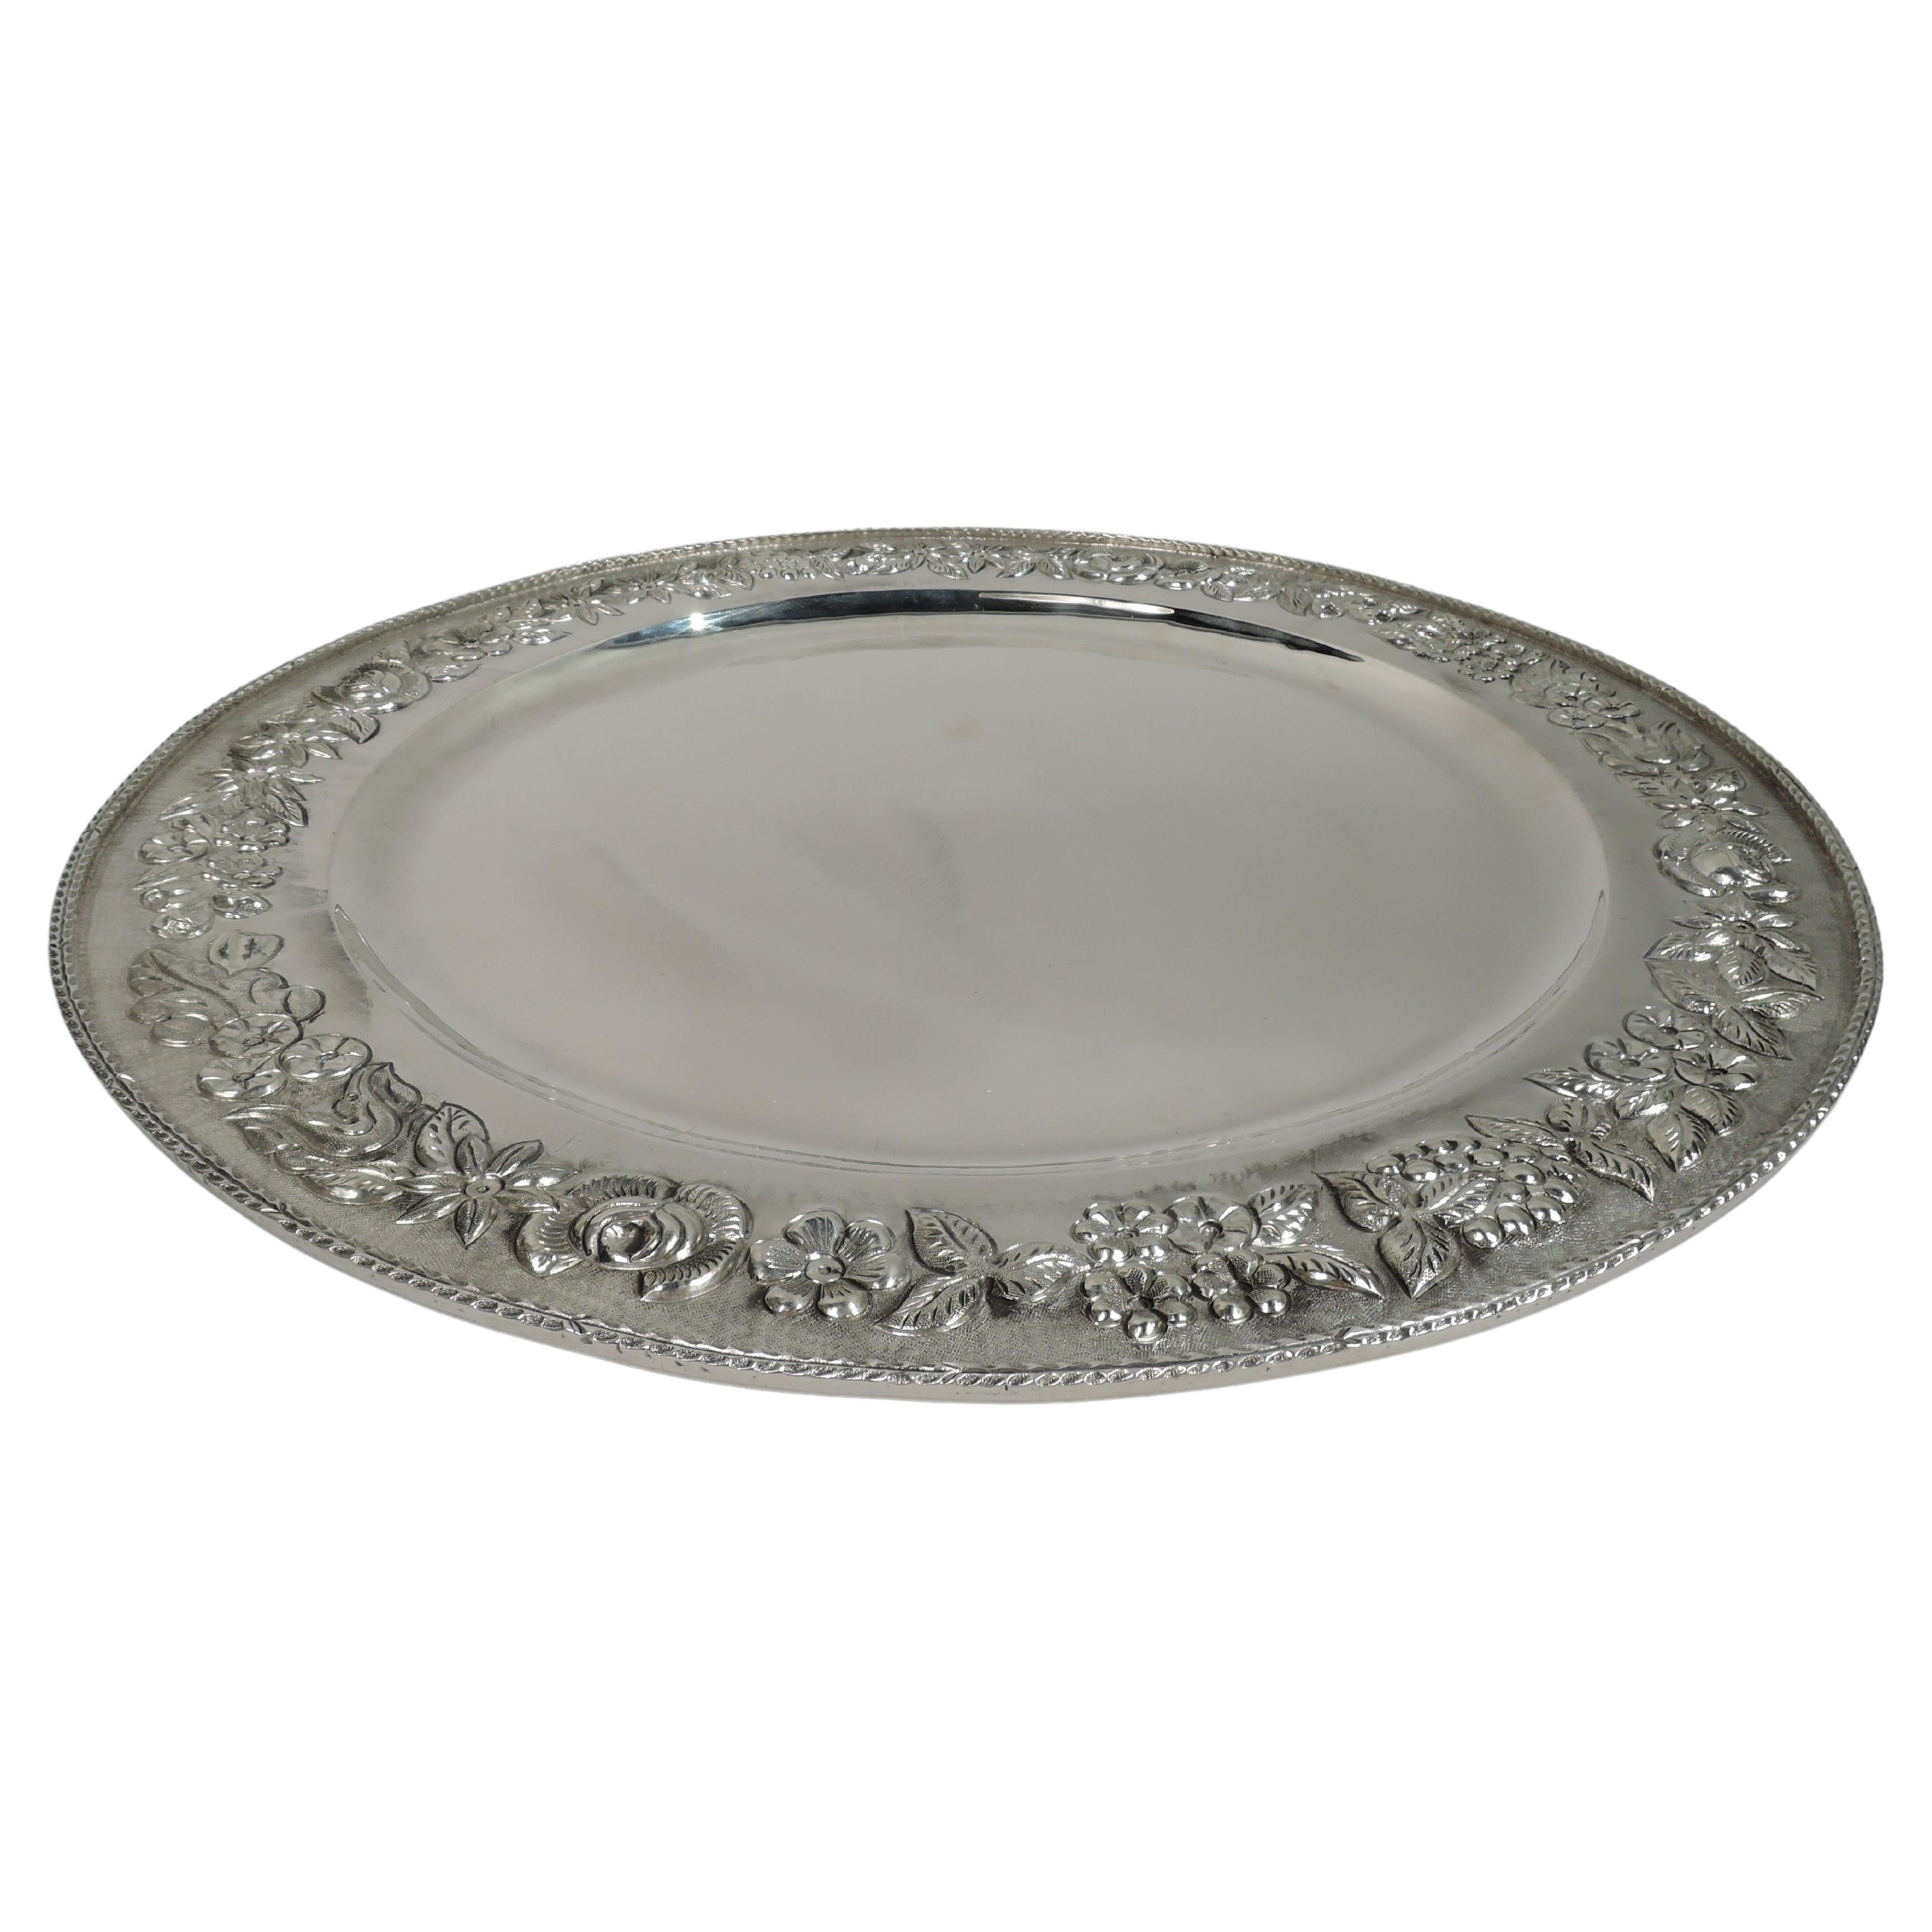 Large & Pretty Silver 16-Inch Round Tray with Repousse Floral Garland